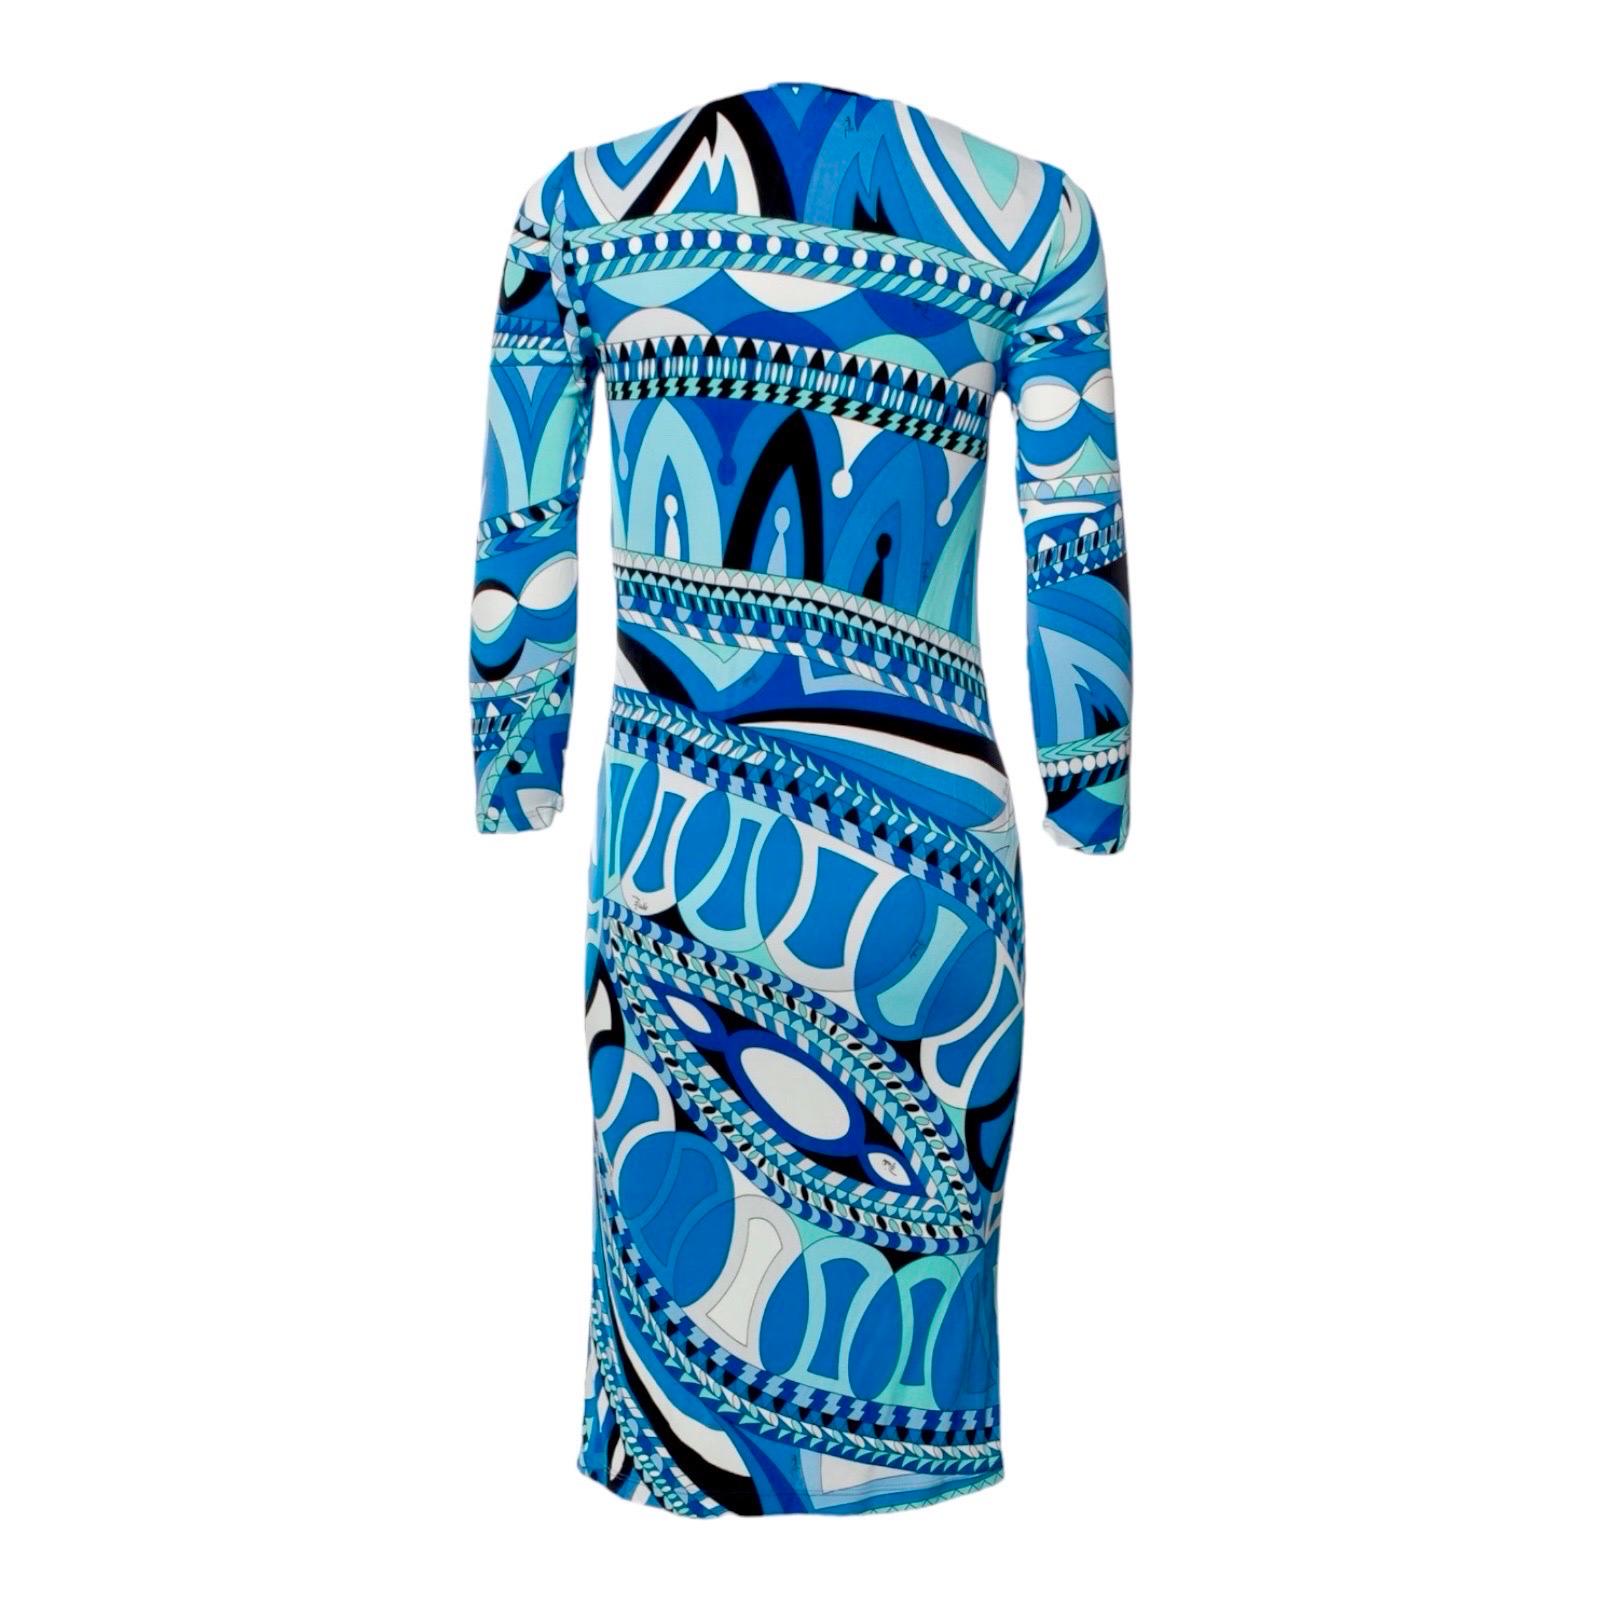 A stunning piece by Emilio Pucci
Made of finest printed fabric
Signature print signed with 